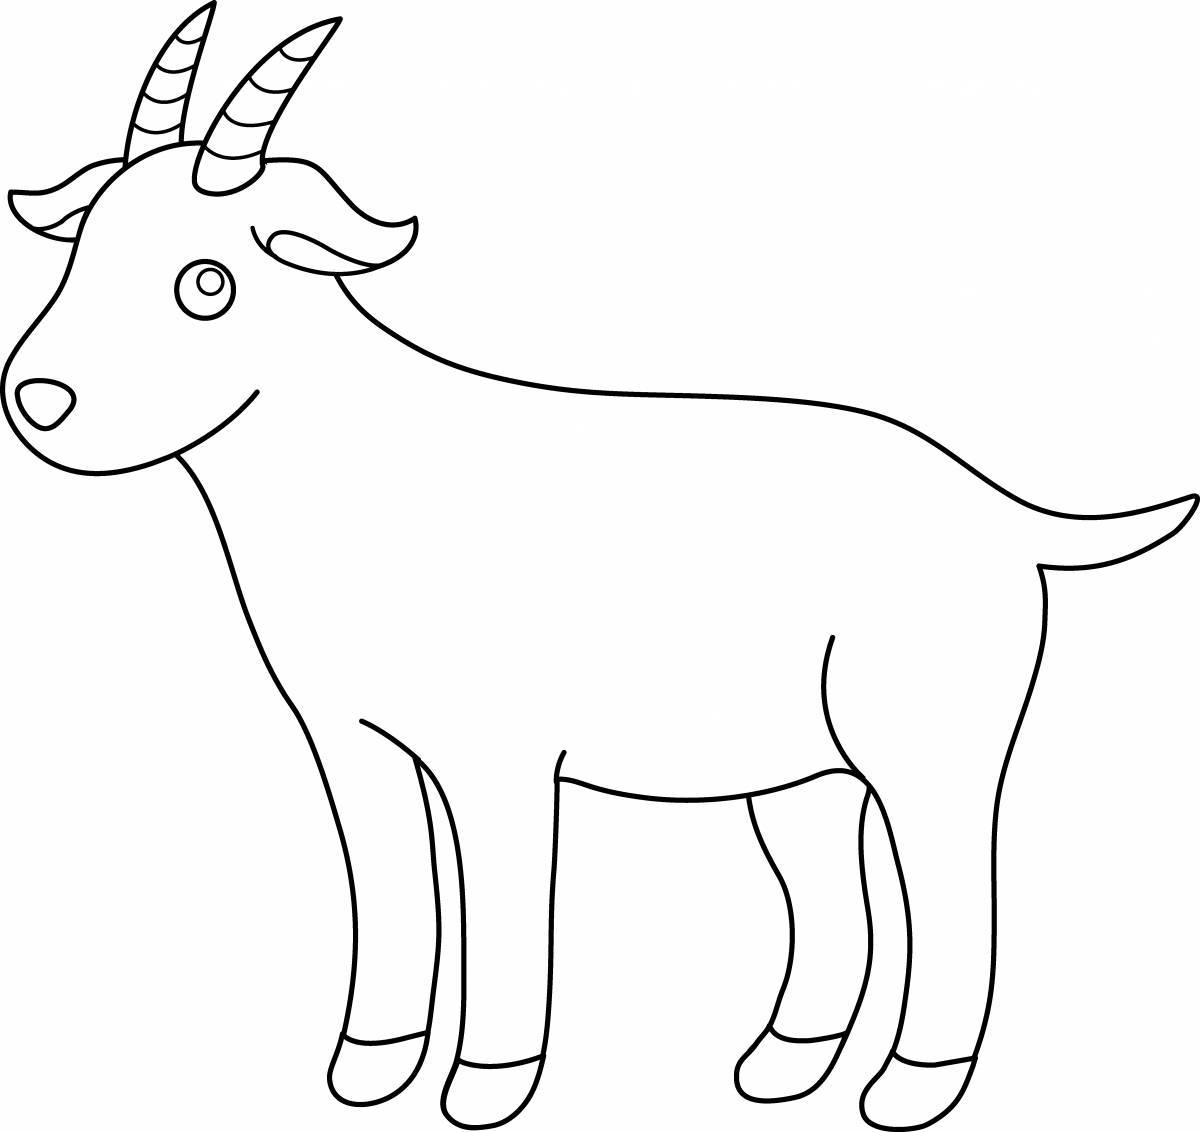 Crazy Child Coloring Page